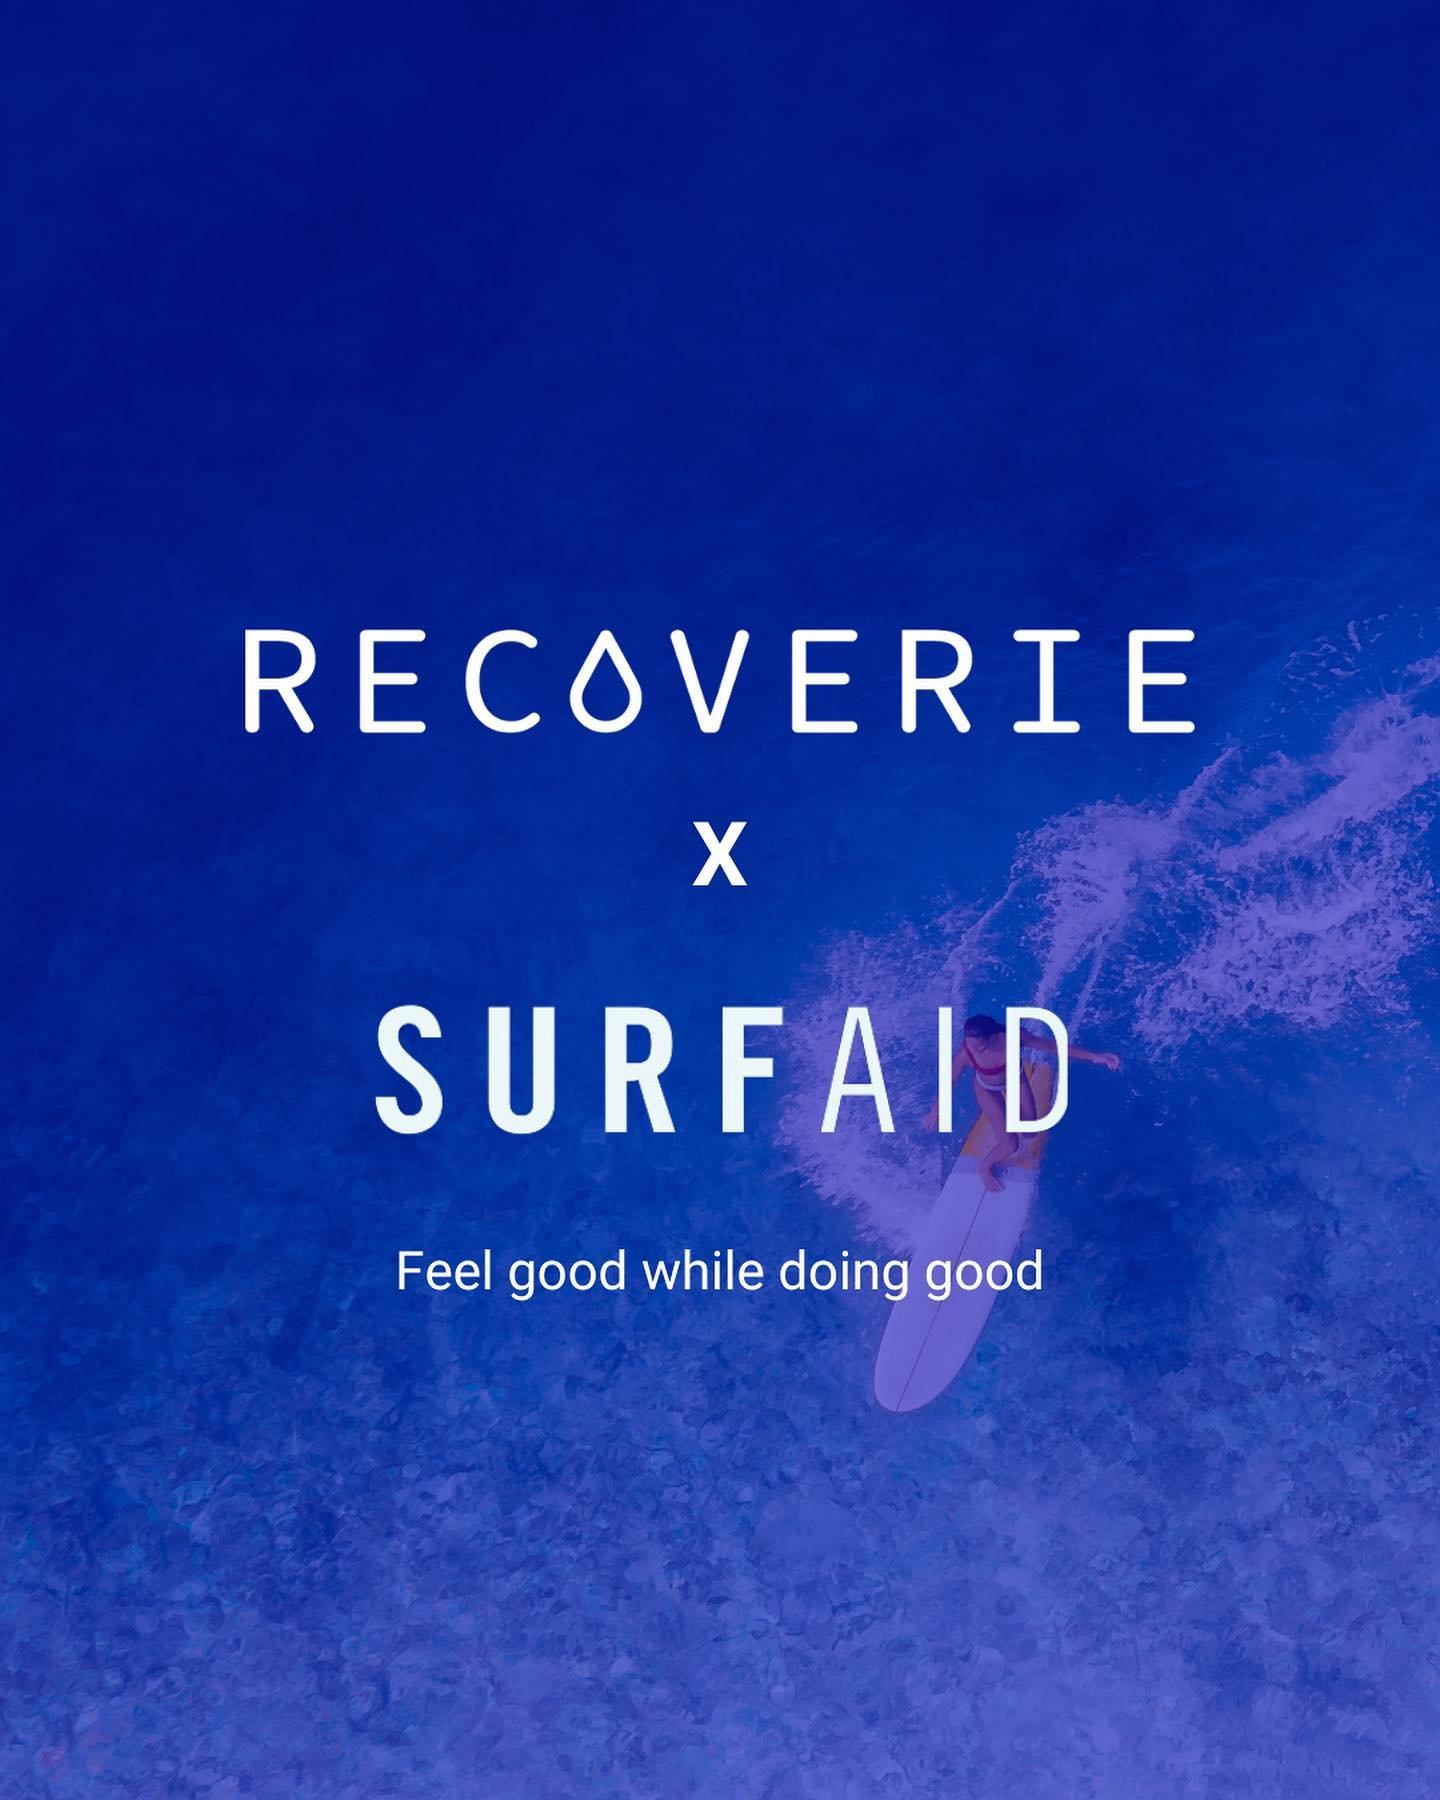 Feel good and do good with Recoverie x @surfaid, with a mission to improve the health, wellbeing and resilience of families living in isolated regions connected to us through surfing 💙

With the annual SurfAid event coming up on the 17th of May in B